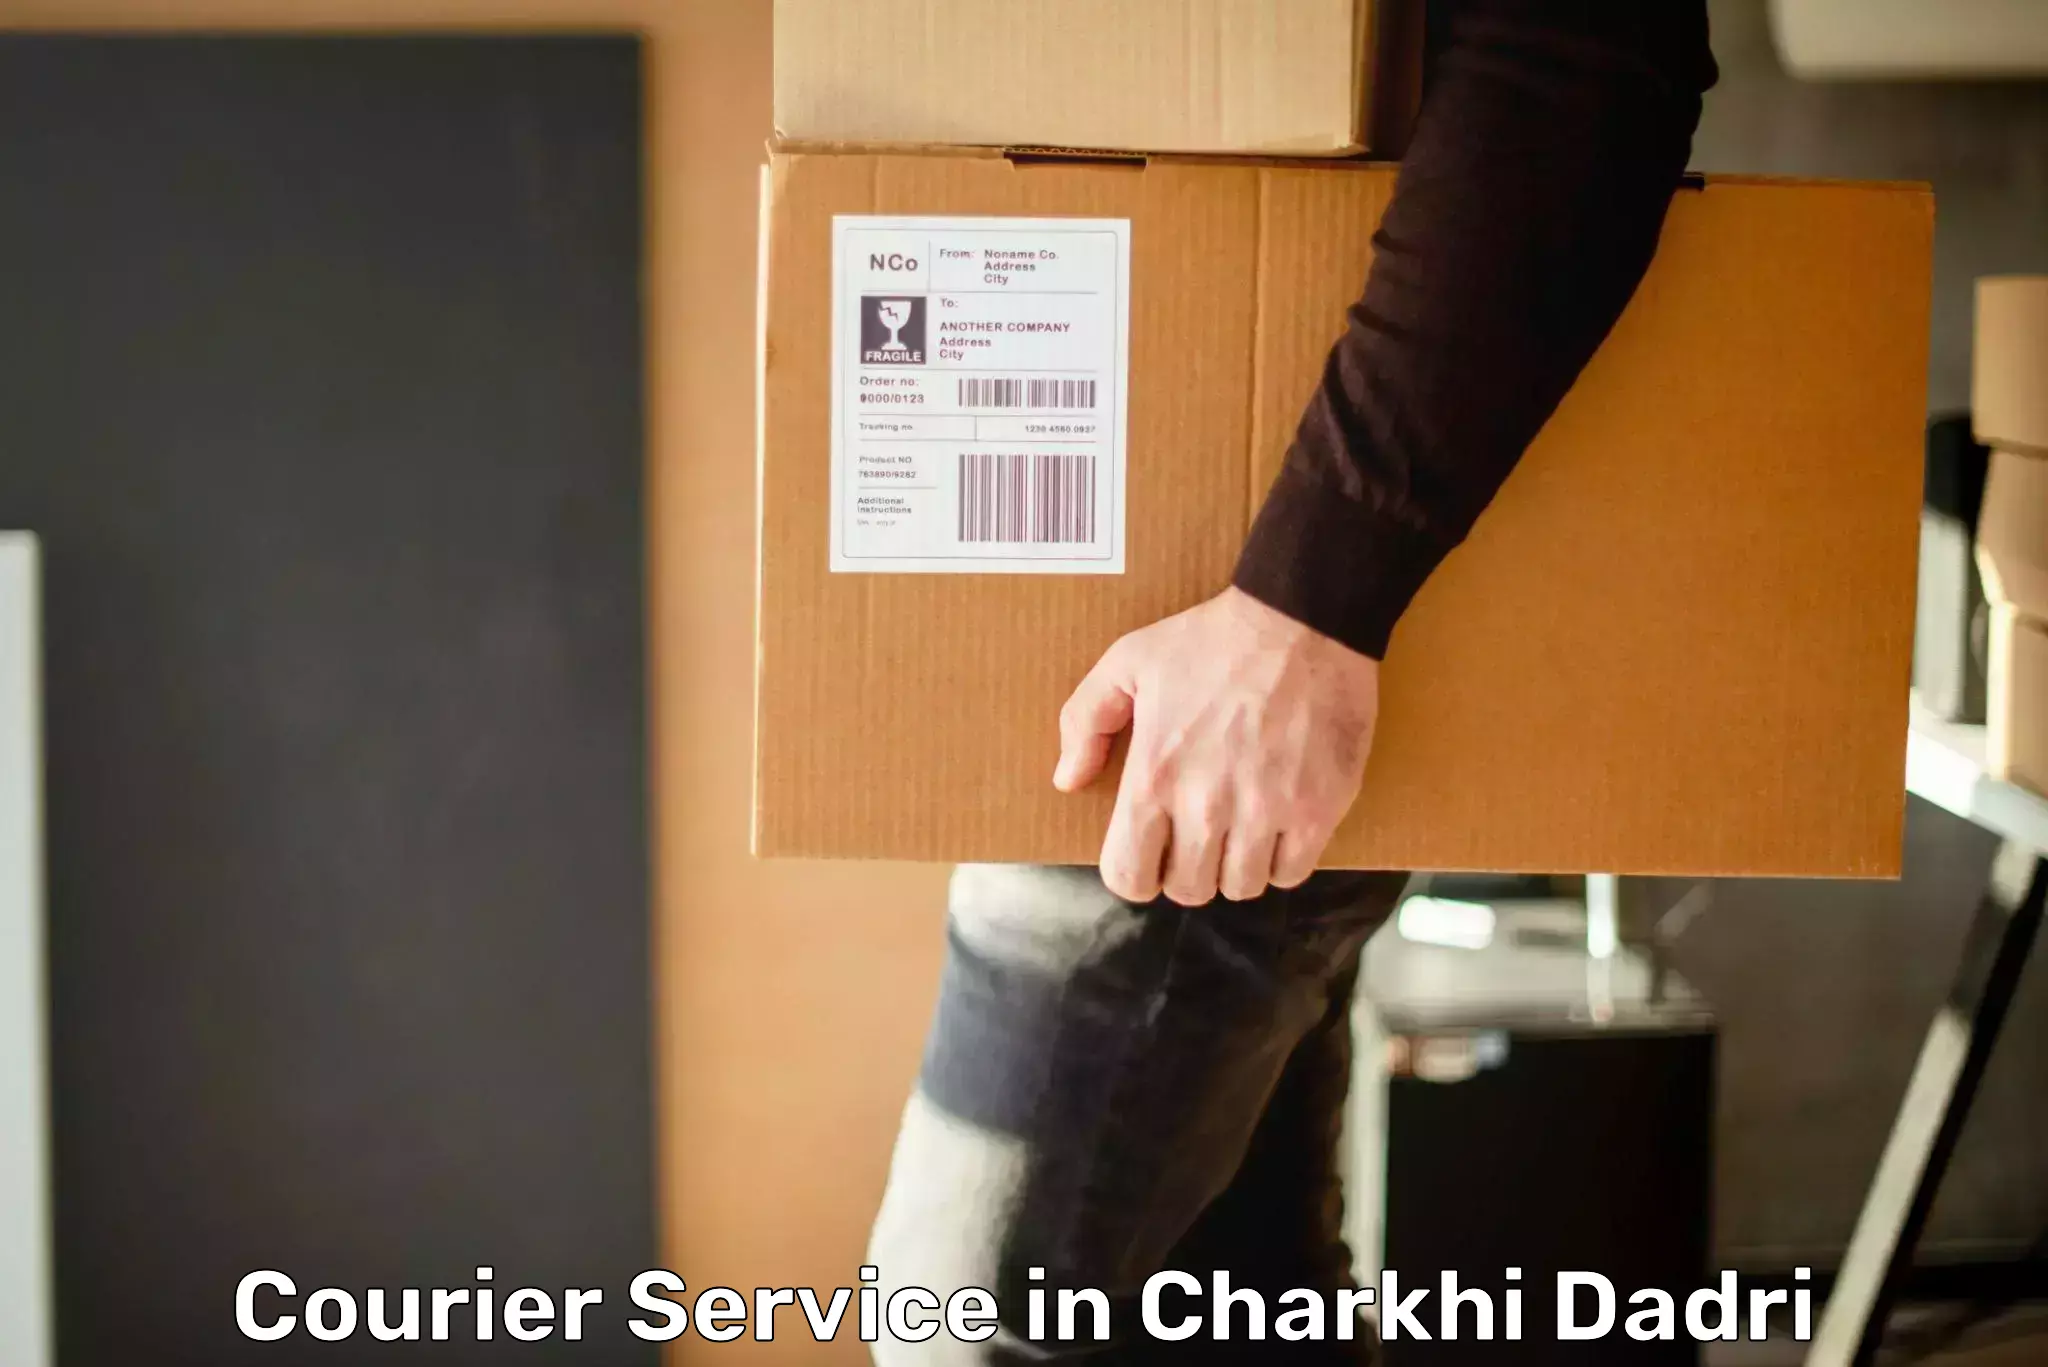 Automated shipping in Charkhi Dadri